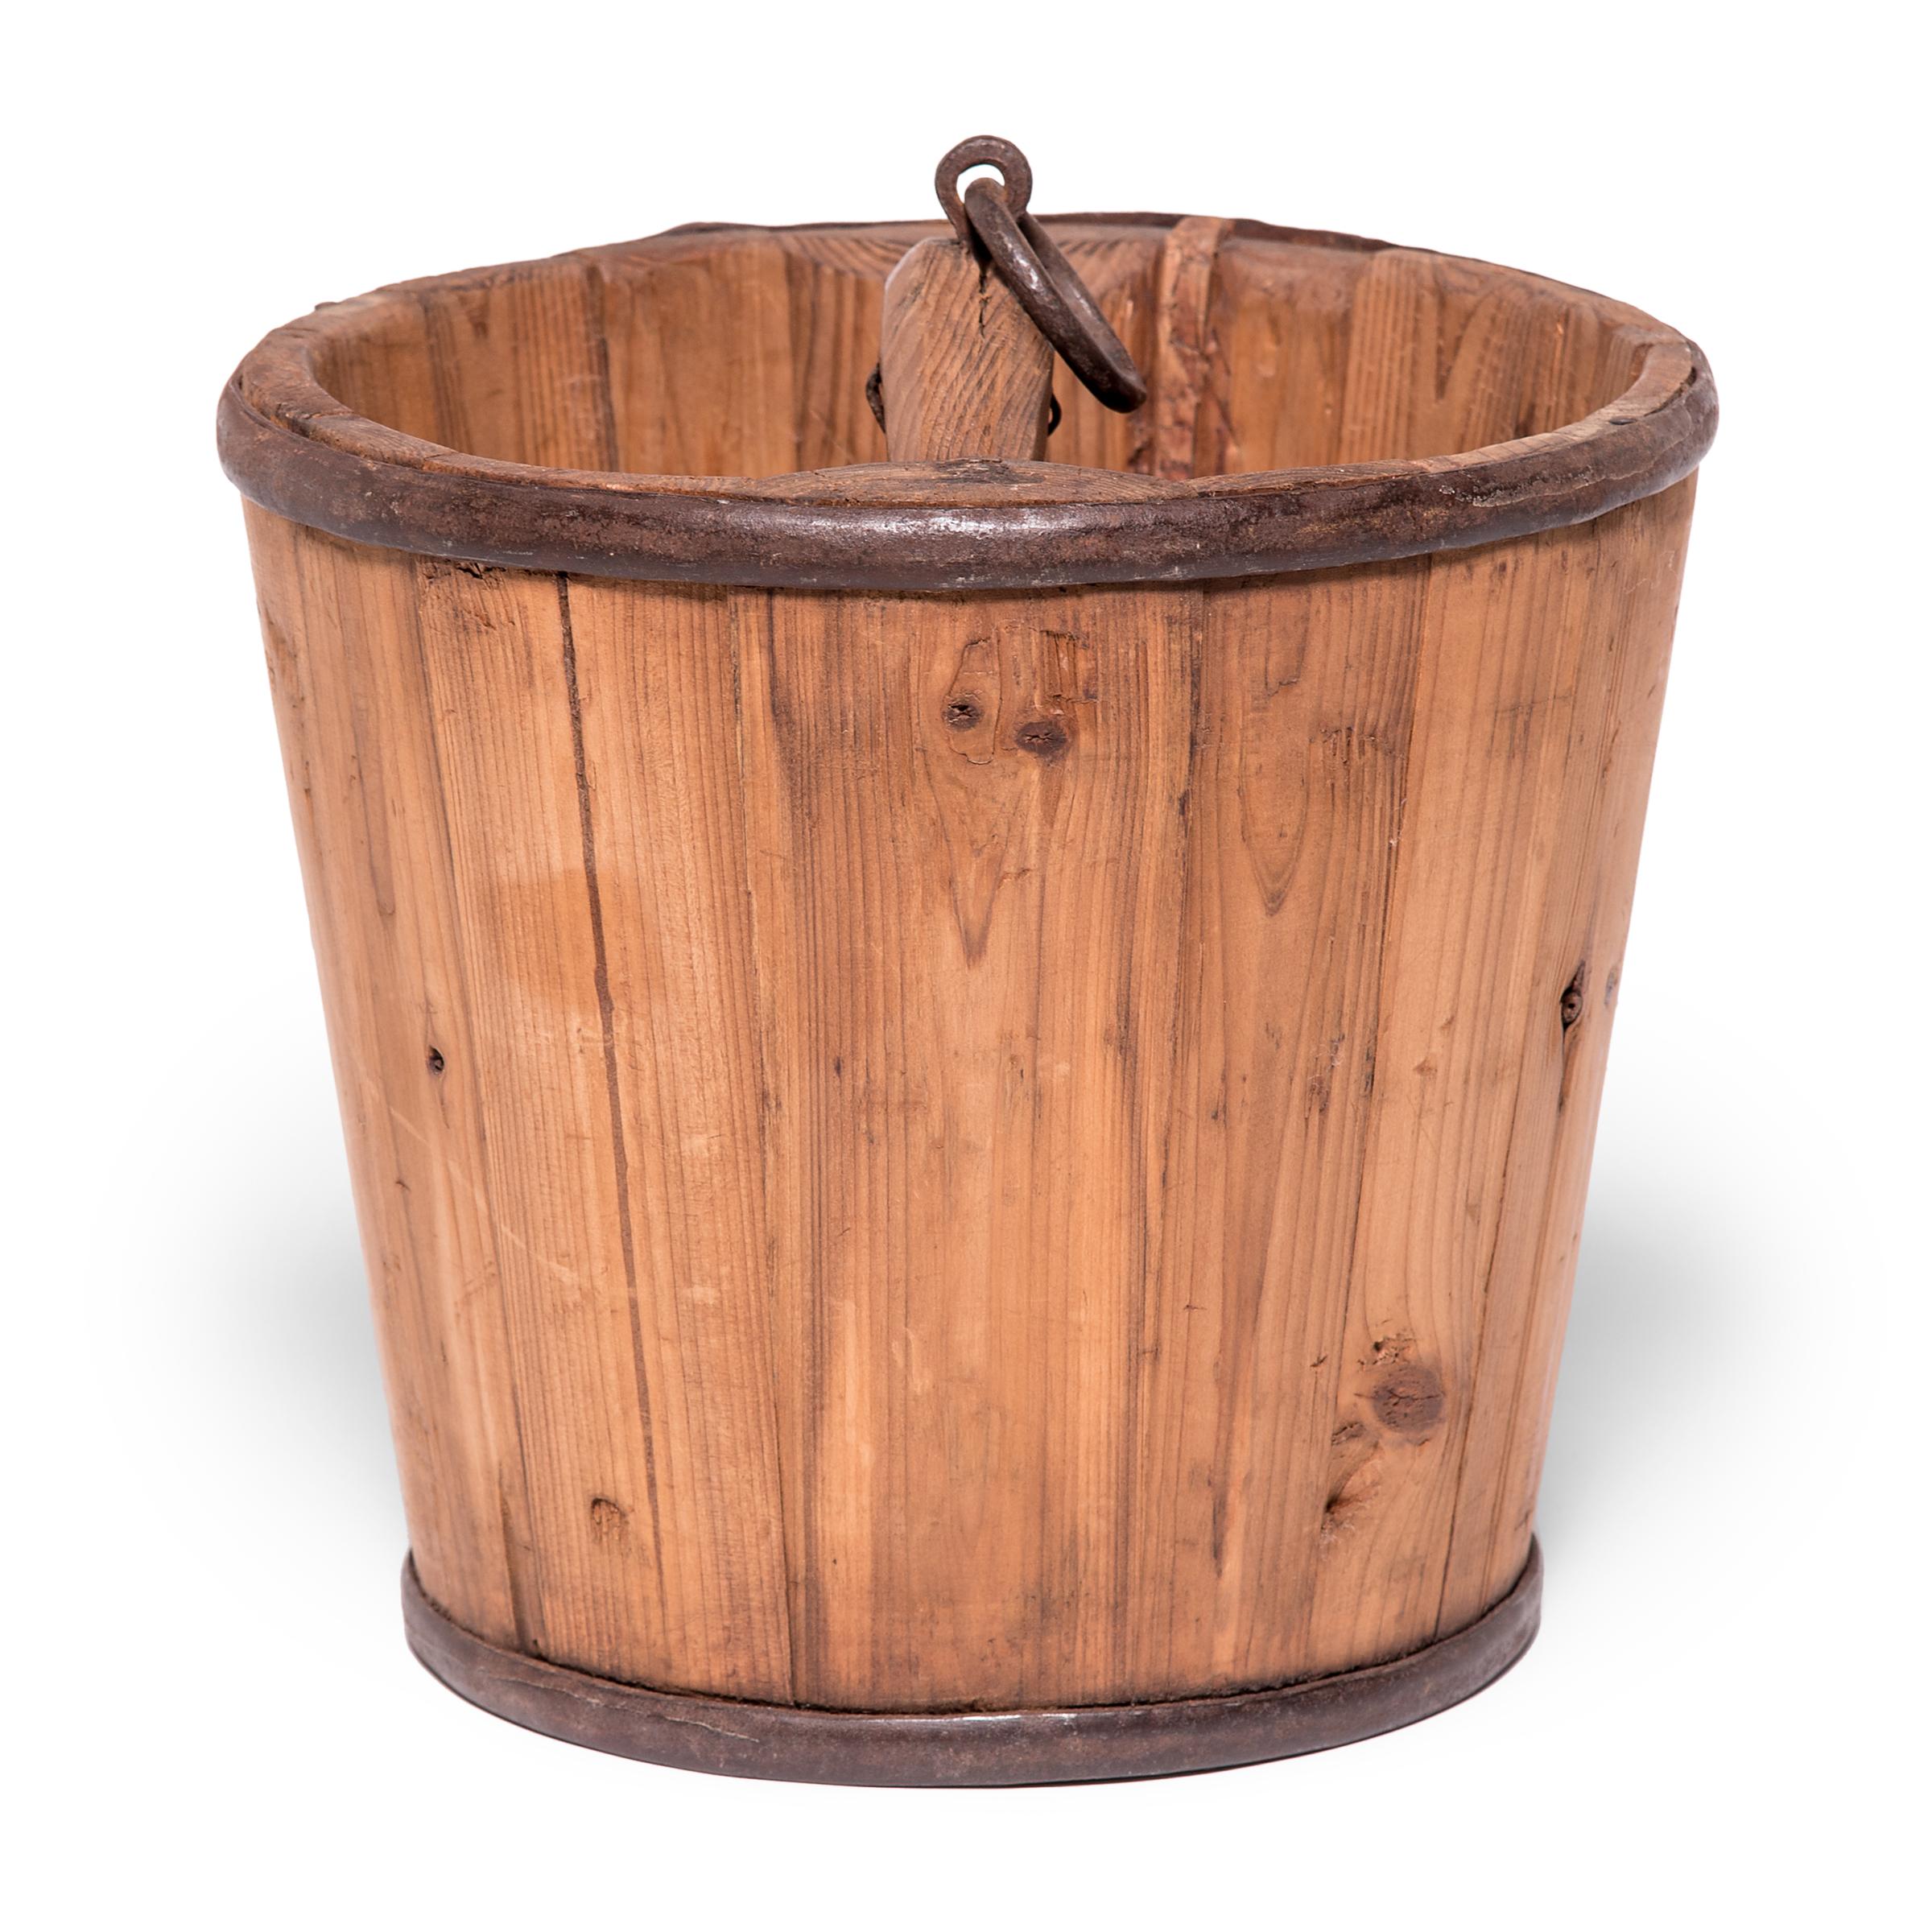 Beautifully aged with warm coloring, this Qing-dynasty bucket draws attention to the ingenuity of its manufacture, consisting of staves of pine bound with iron rings. A small ring attached to the handle suggests the bucket was once used to lift